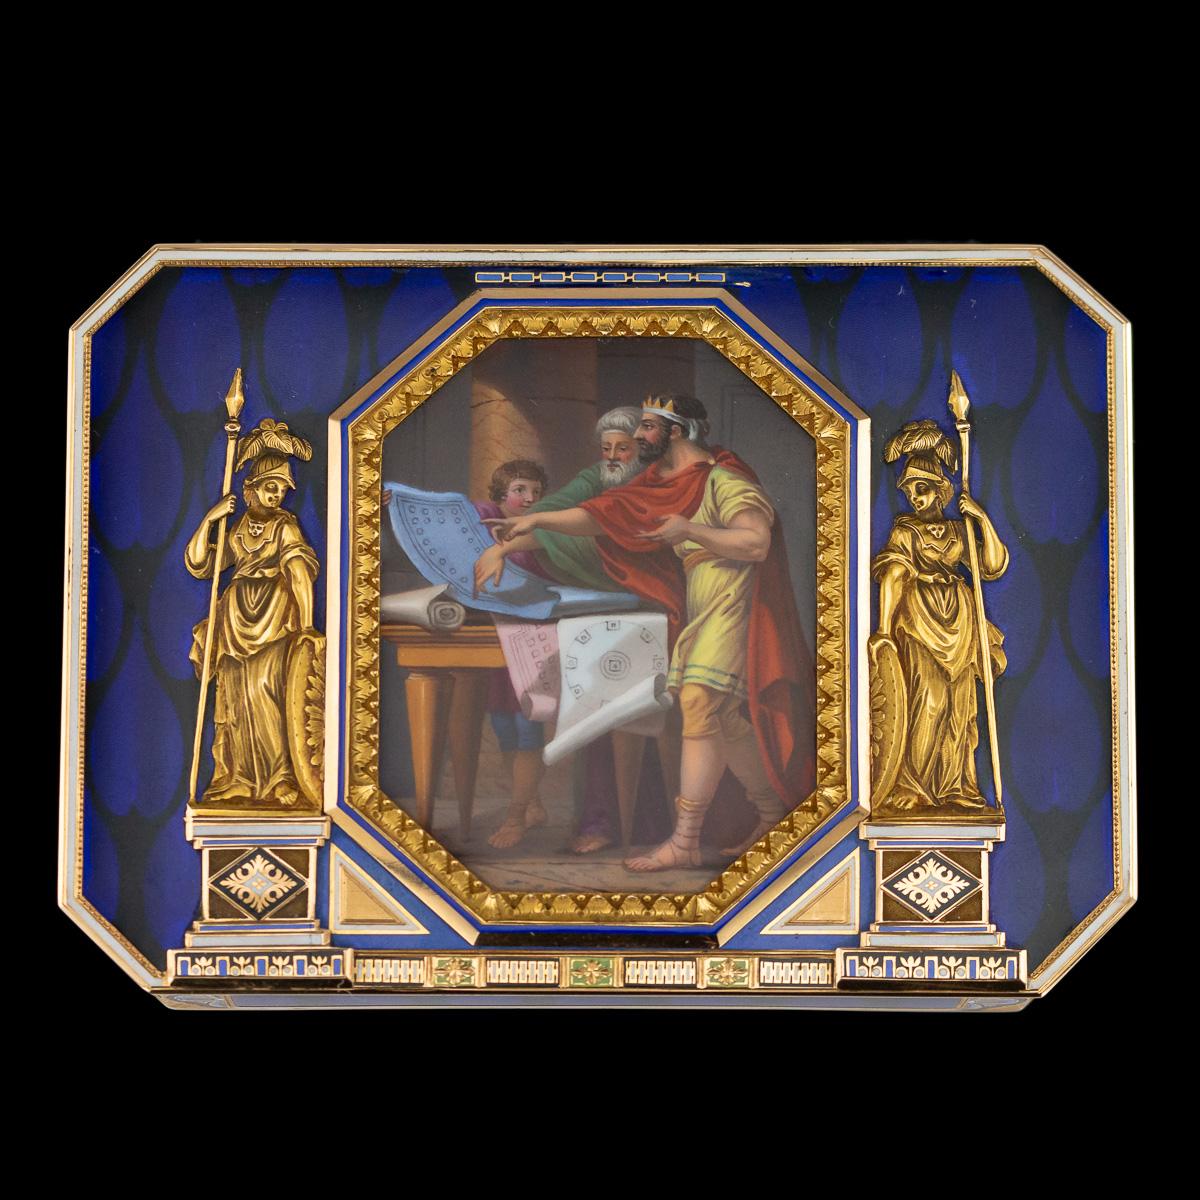 Antique early 19th century exceptional Swiss 18-karat gold & enamel snuff box, of rectangular form with canted corners, the cover is set with a finely painted panel depicting King Solomon and his Architect. According to the Hebrew Bible, Solomon's